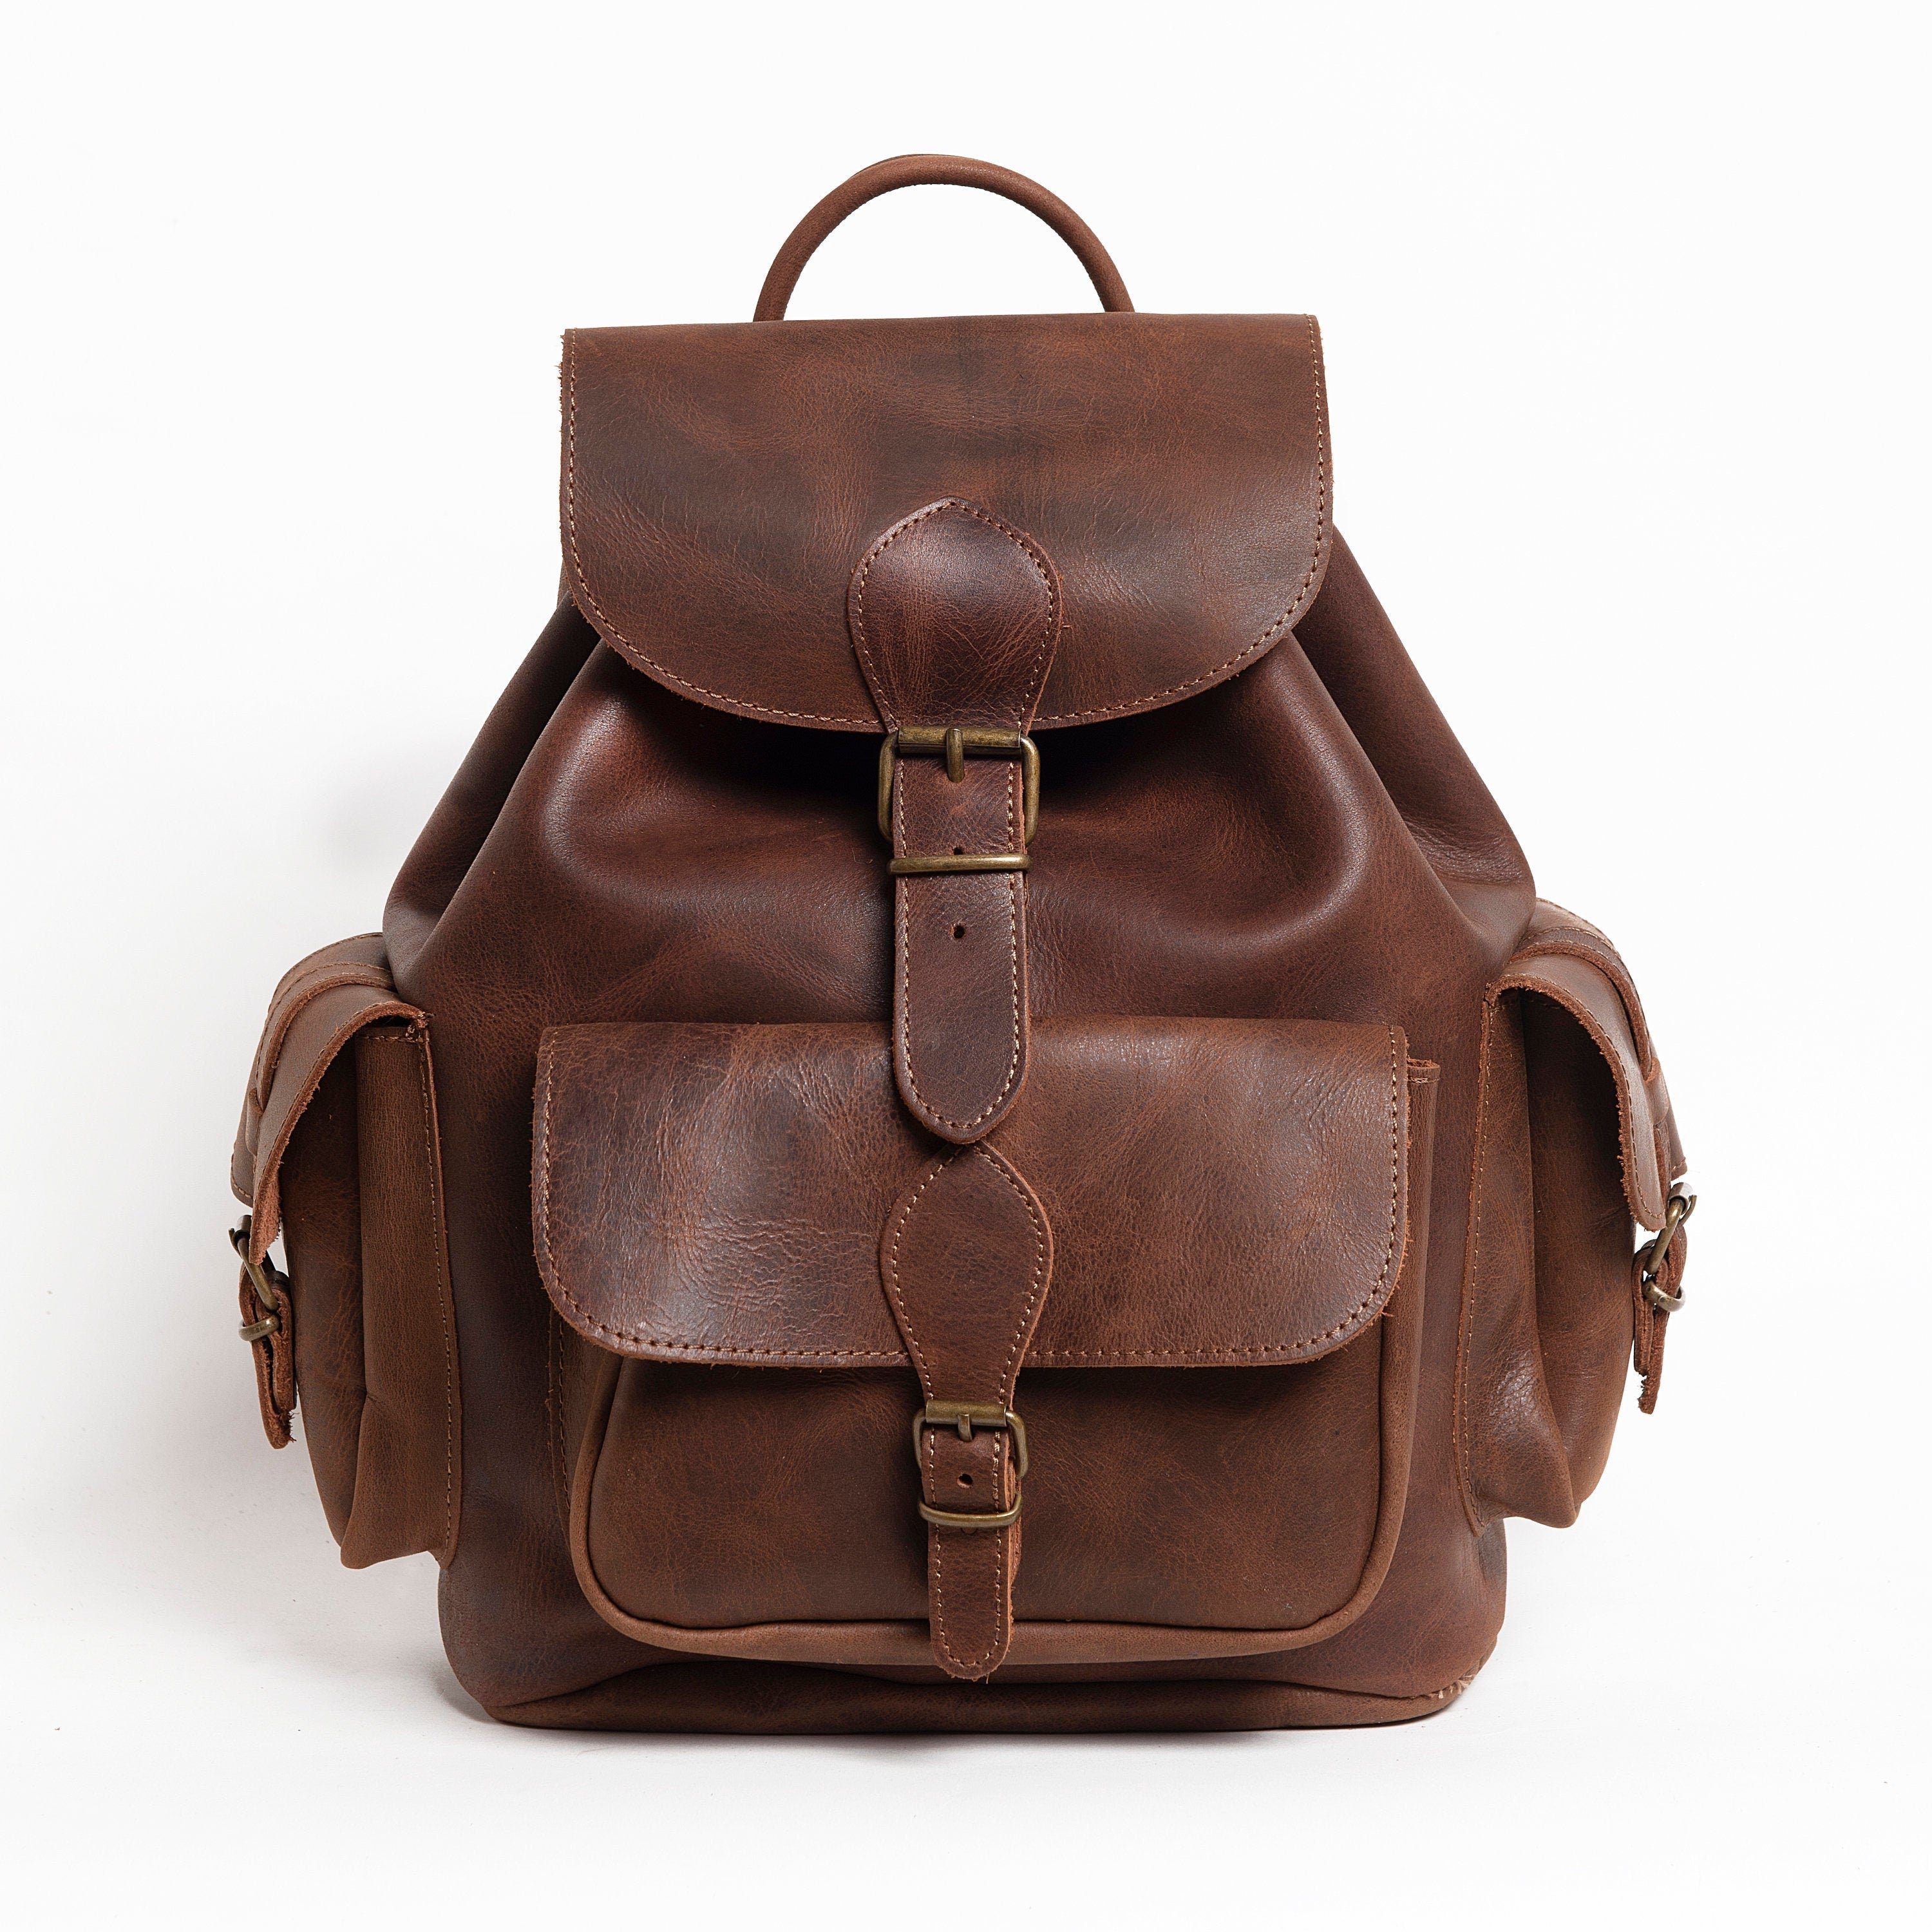 CLASSIC LEATHER BACKPACK vintage style backpack full grain leather in 3 sizes/ 5 colors